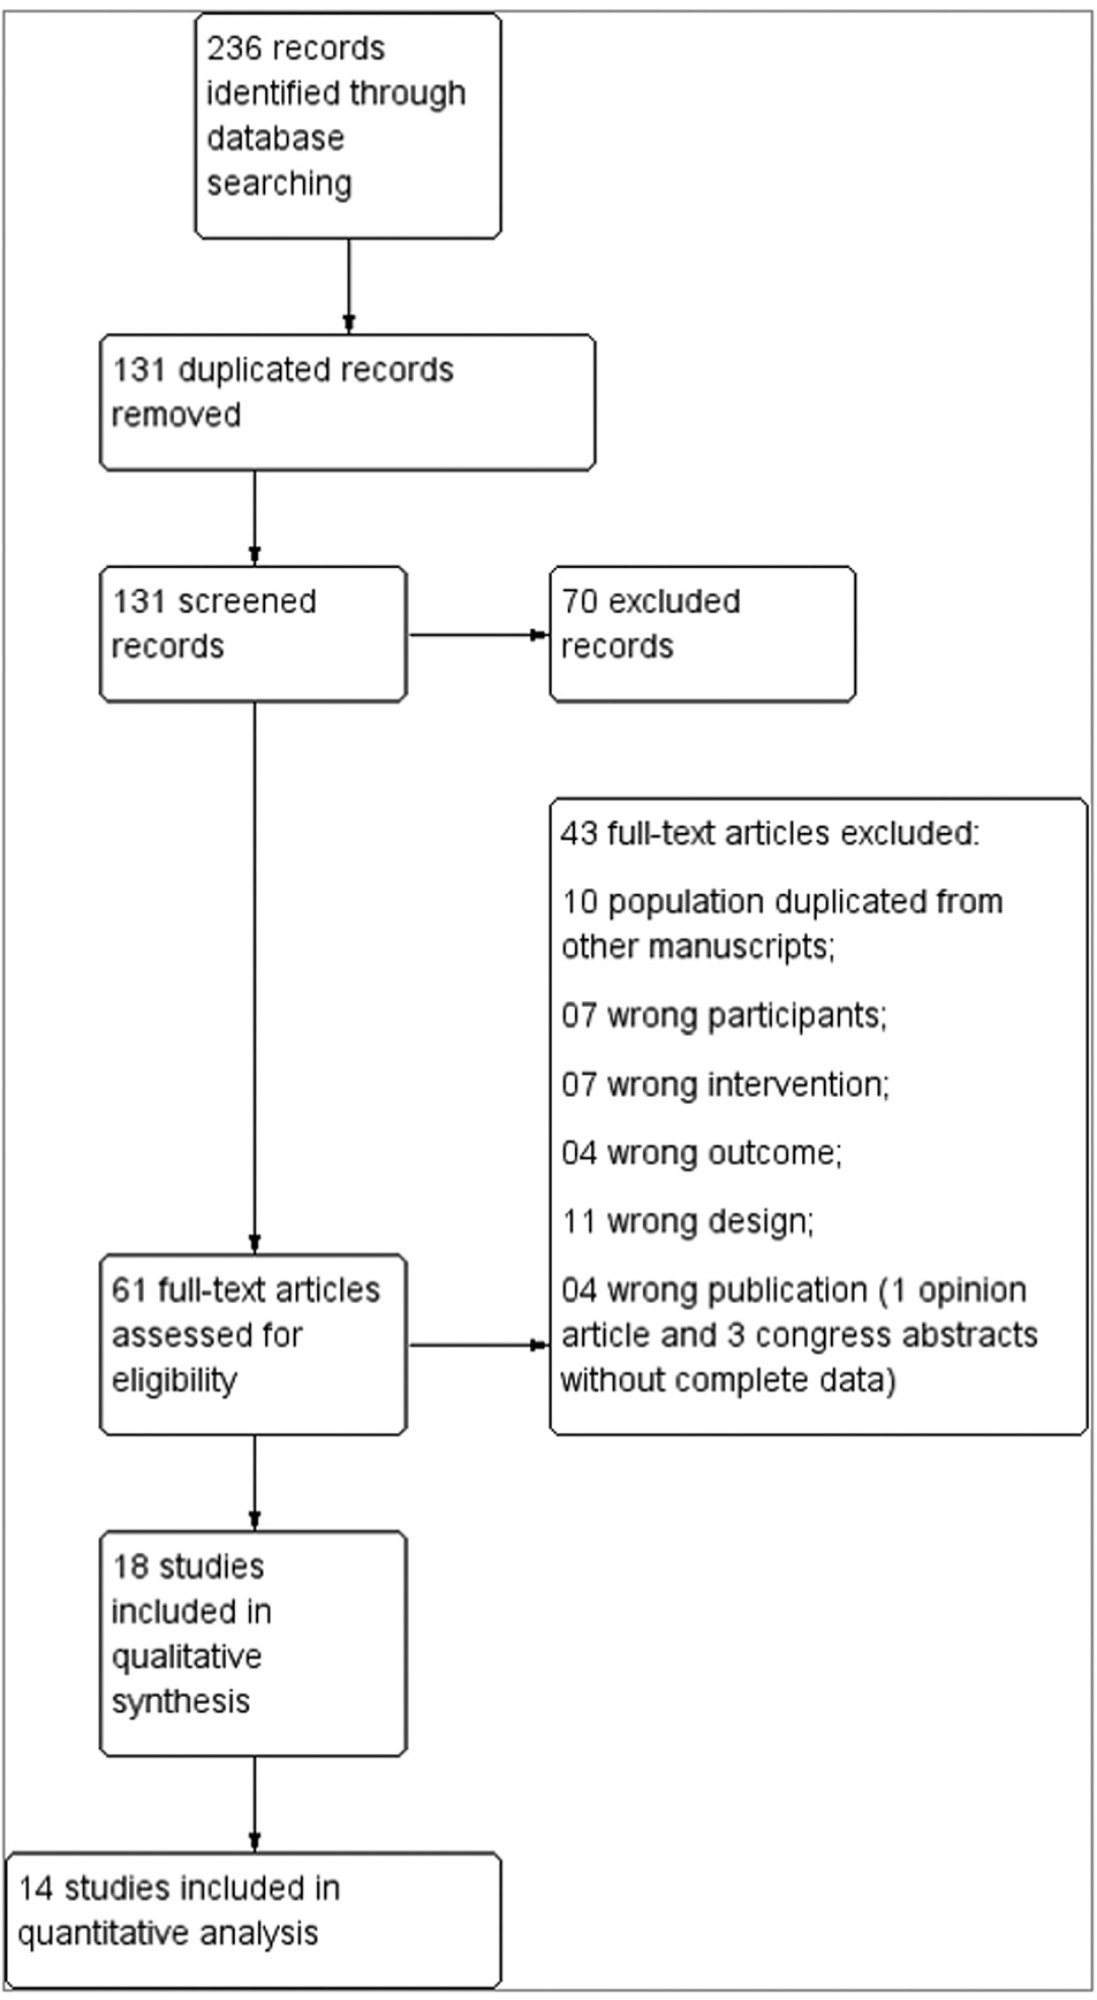 Amniotic Sludge and Prematurity: Systematic Review and Meta-analysis